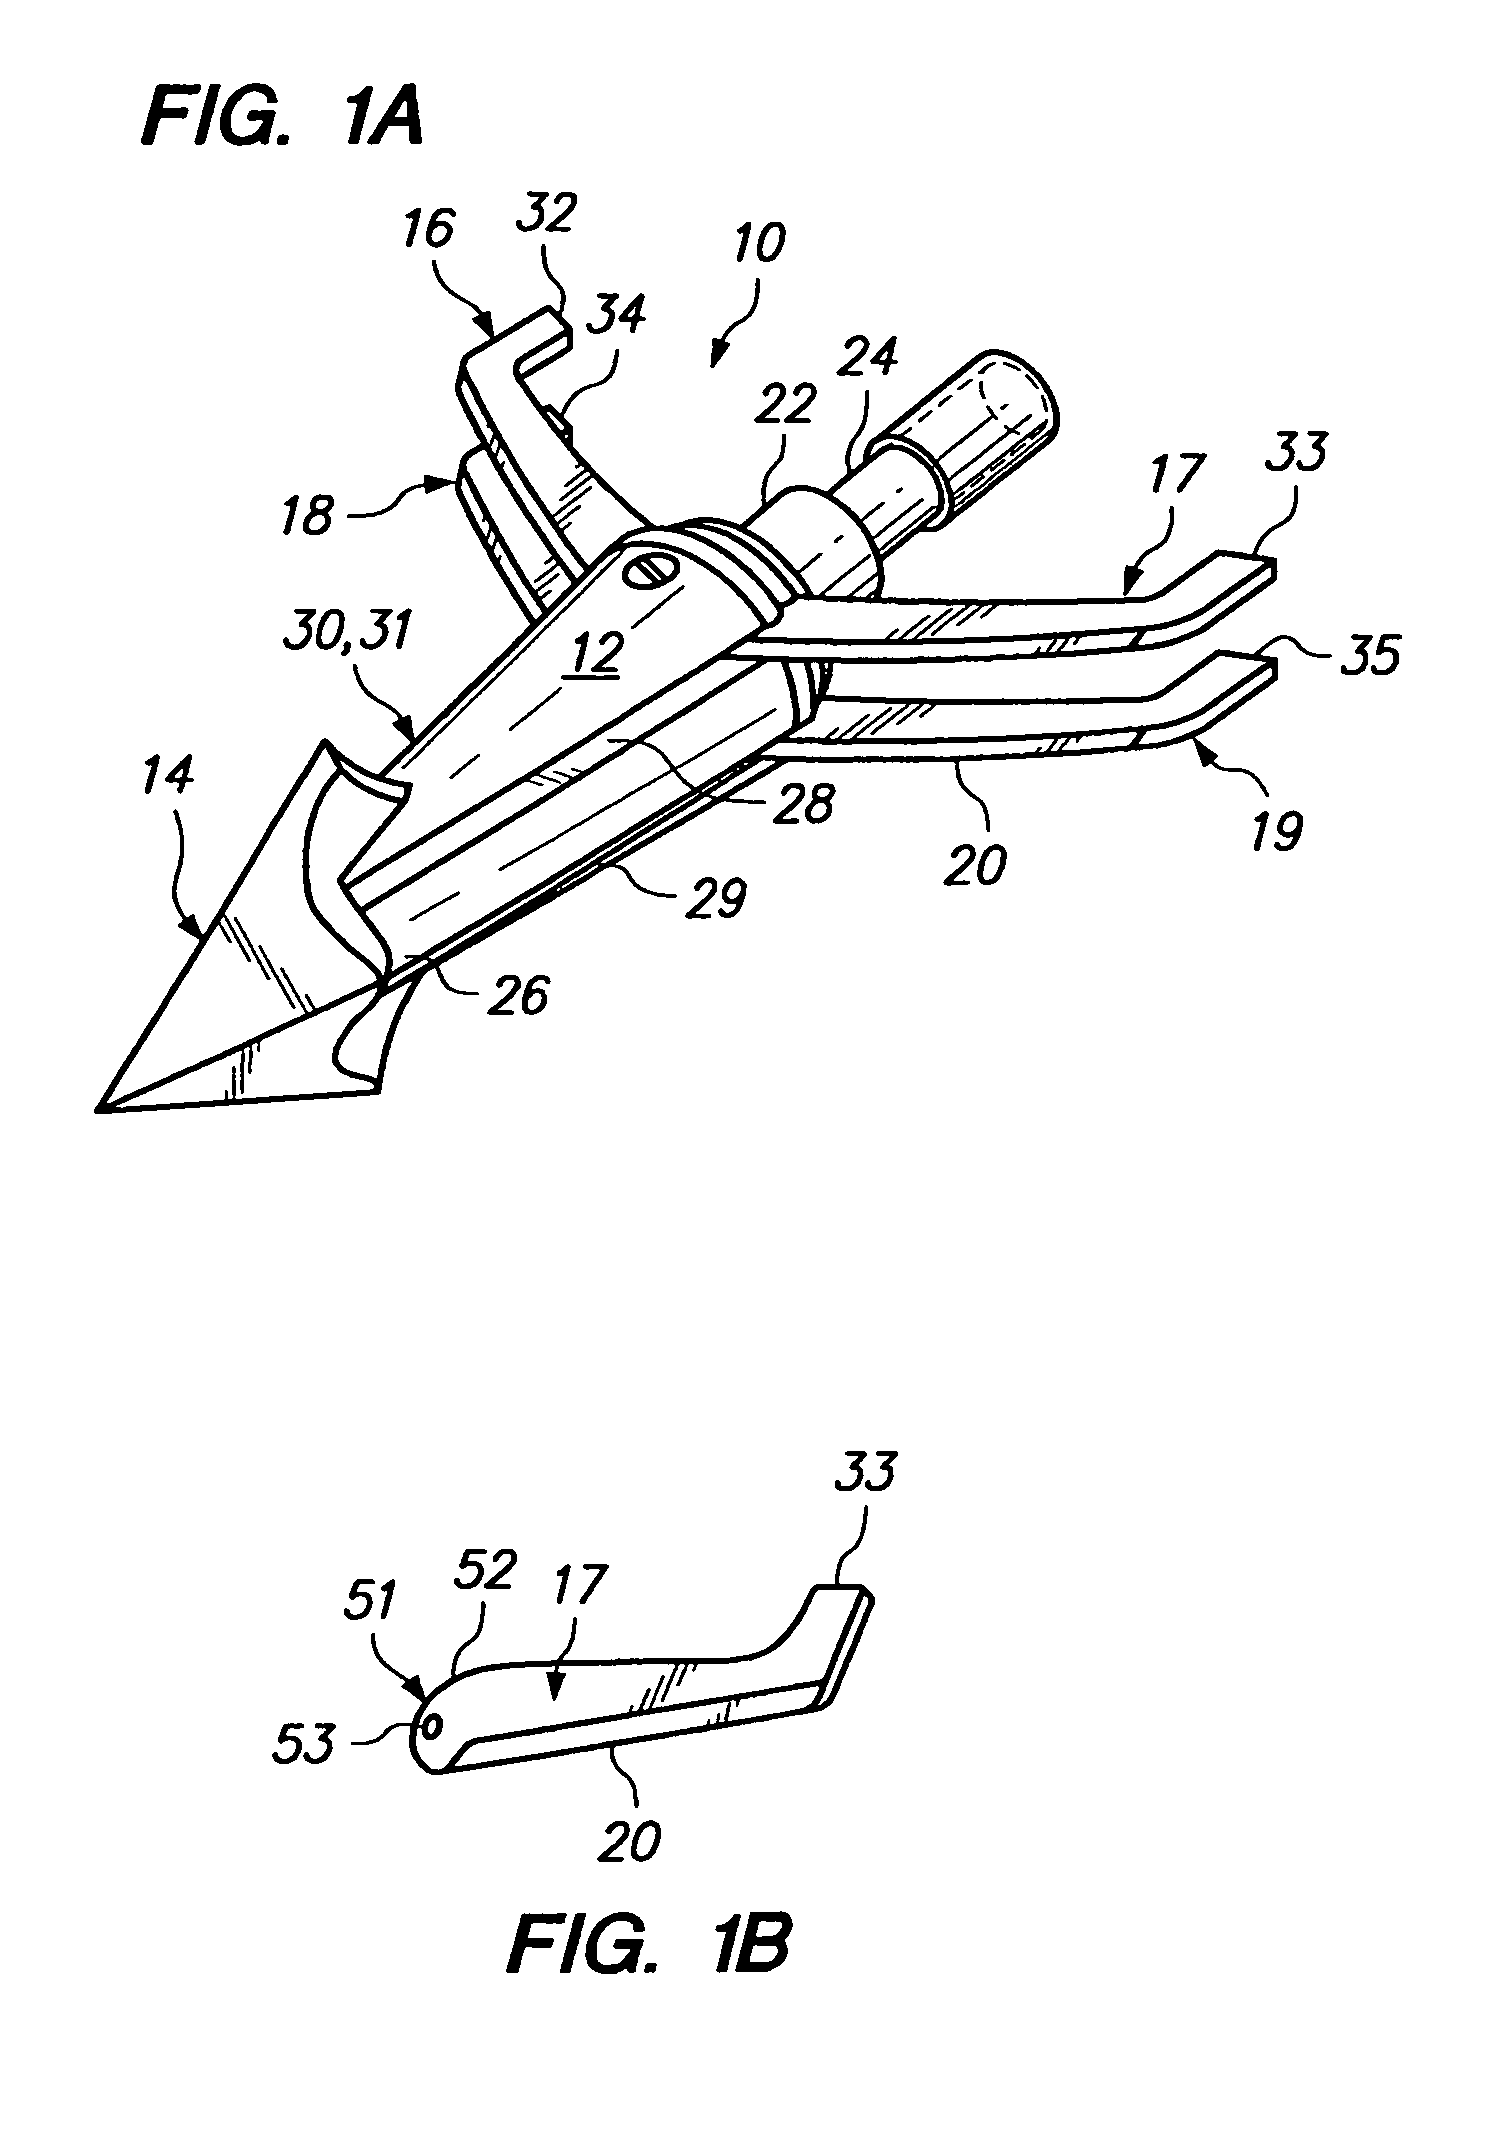 Arrowhead having both fixed and mechanically expandable blades